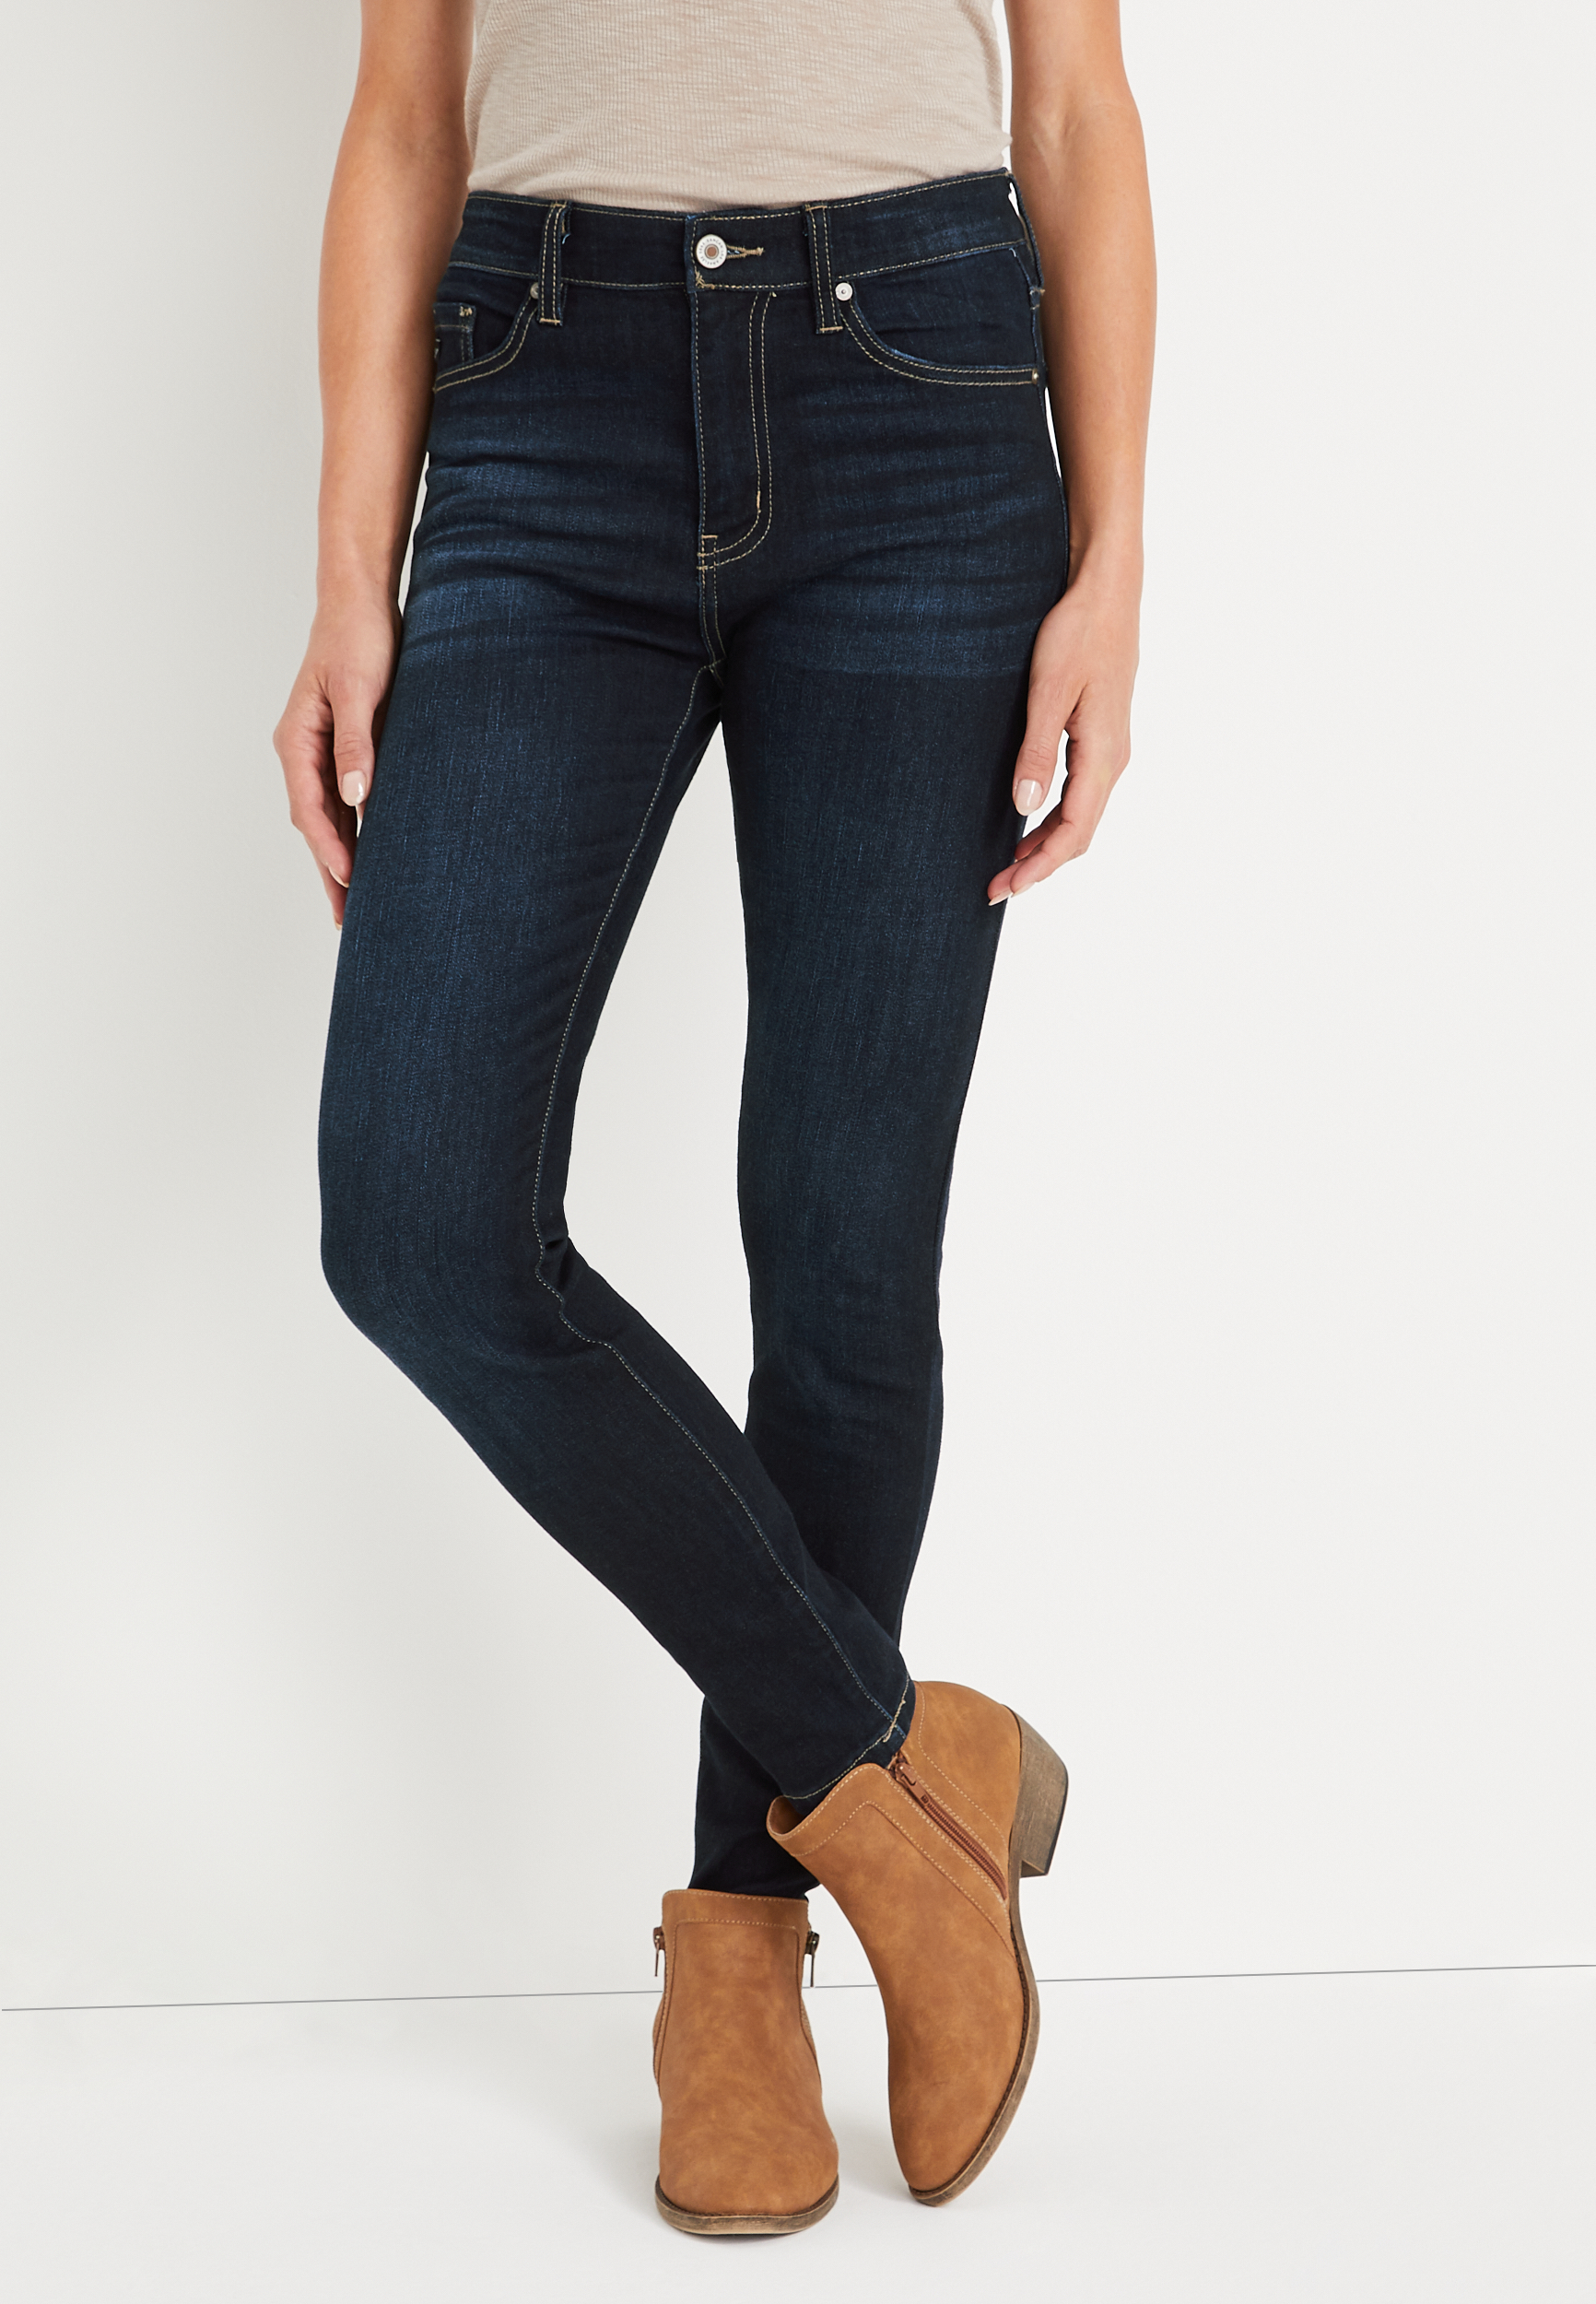 KanCan™ Skinny High Rise Jean | maurices